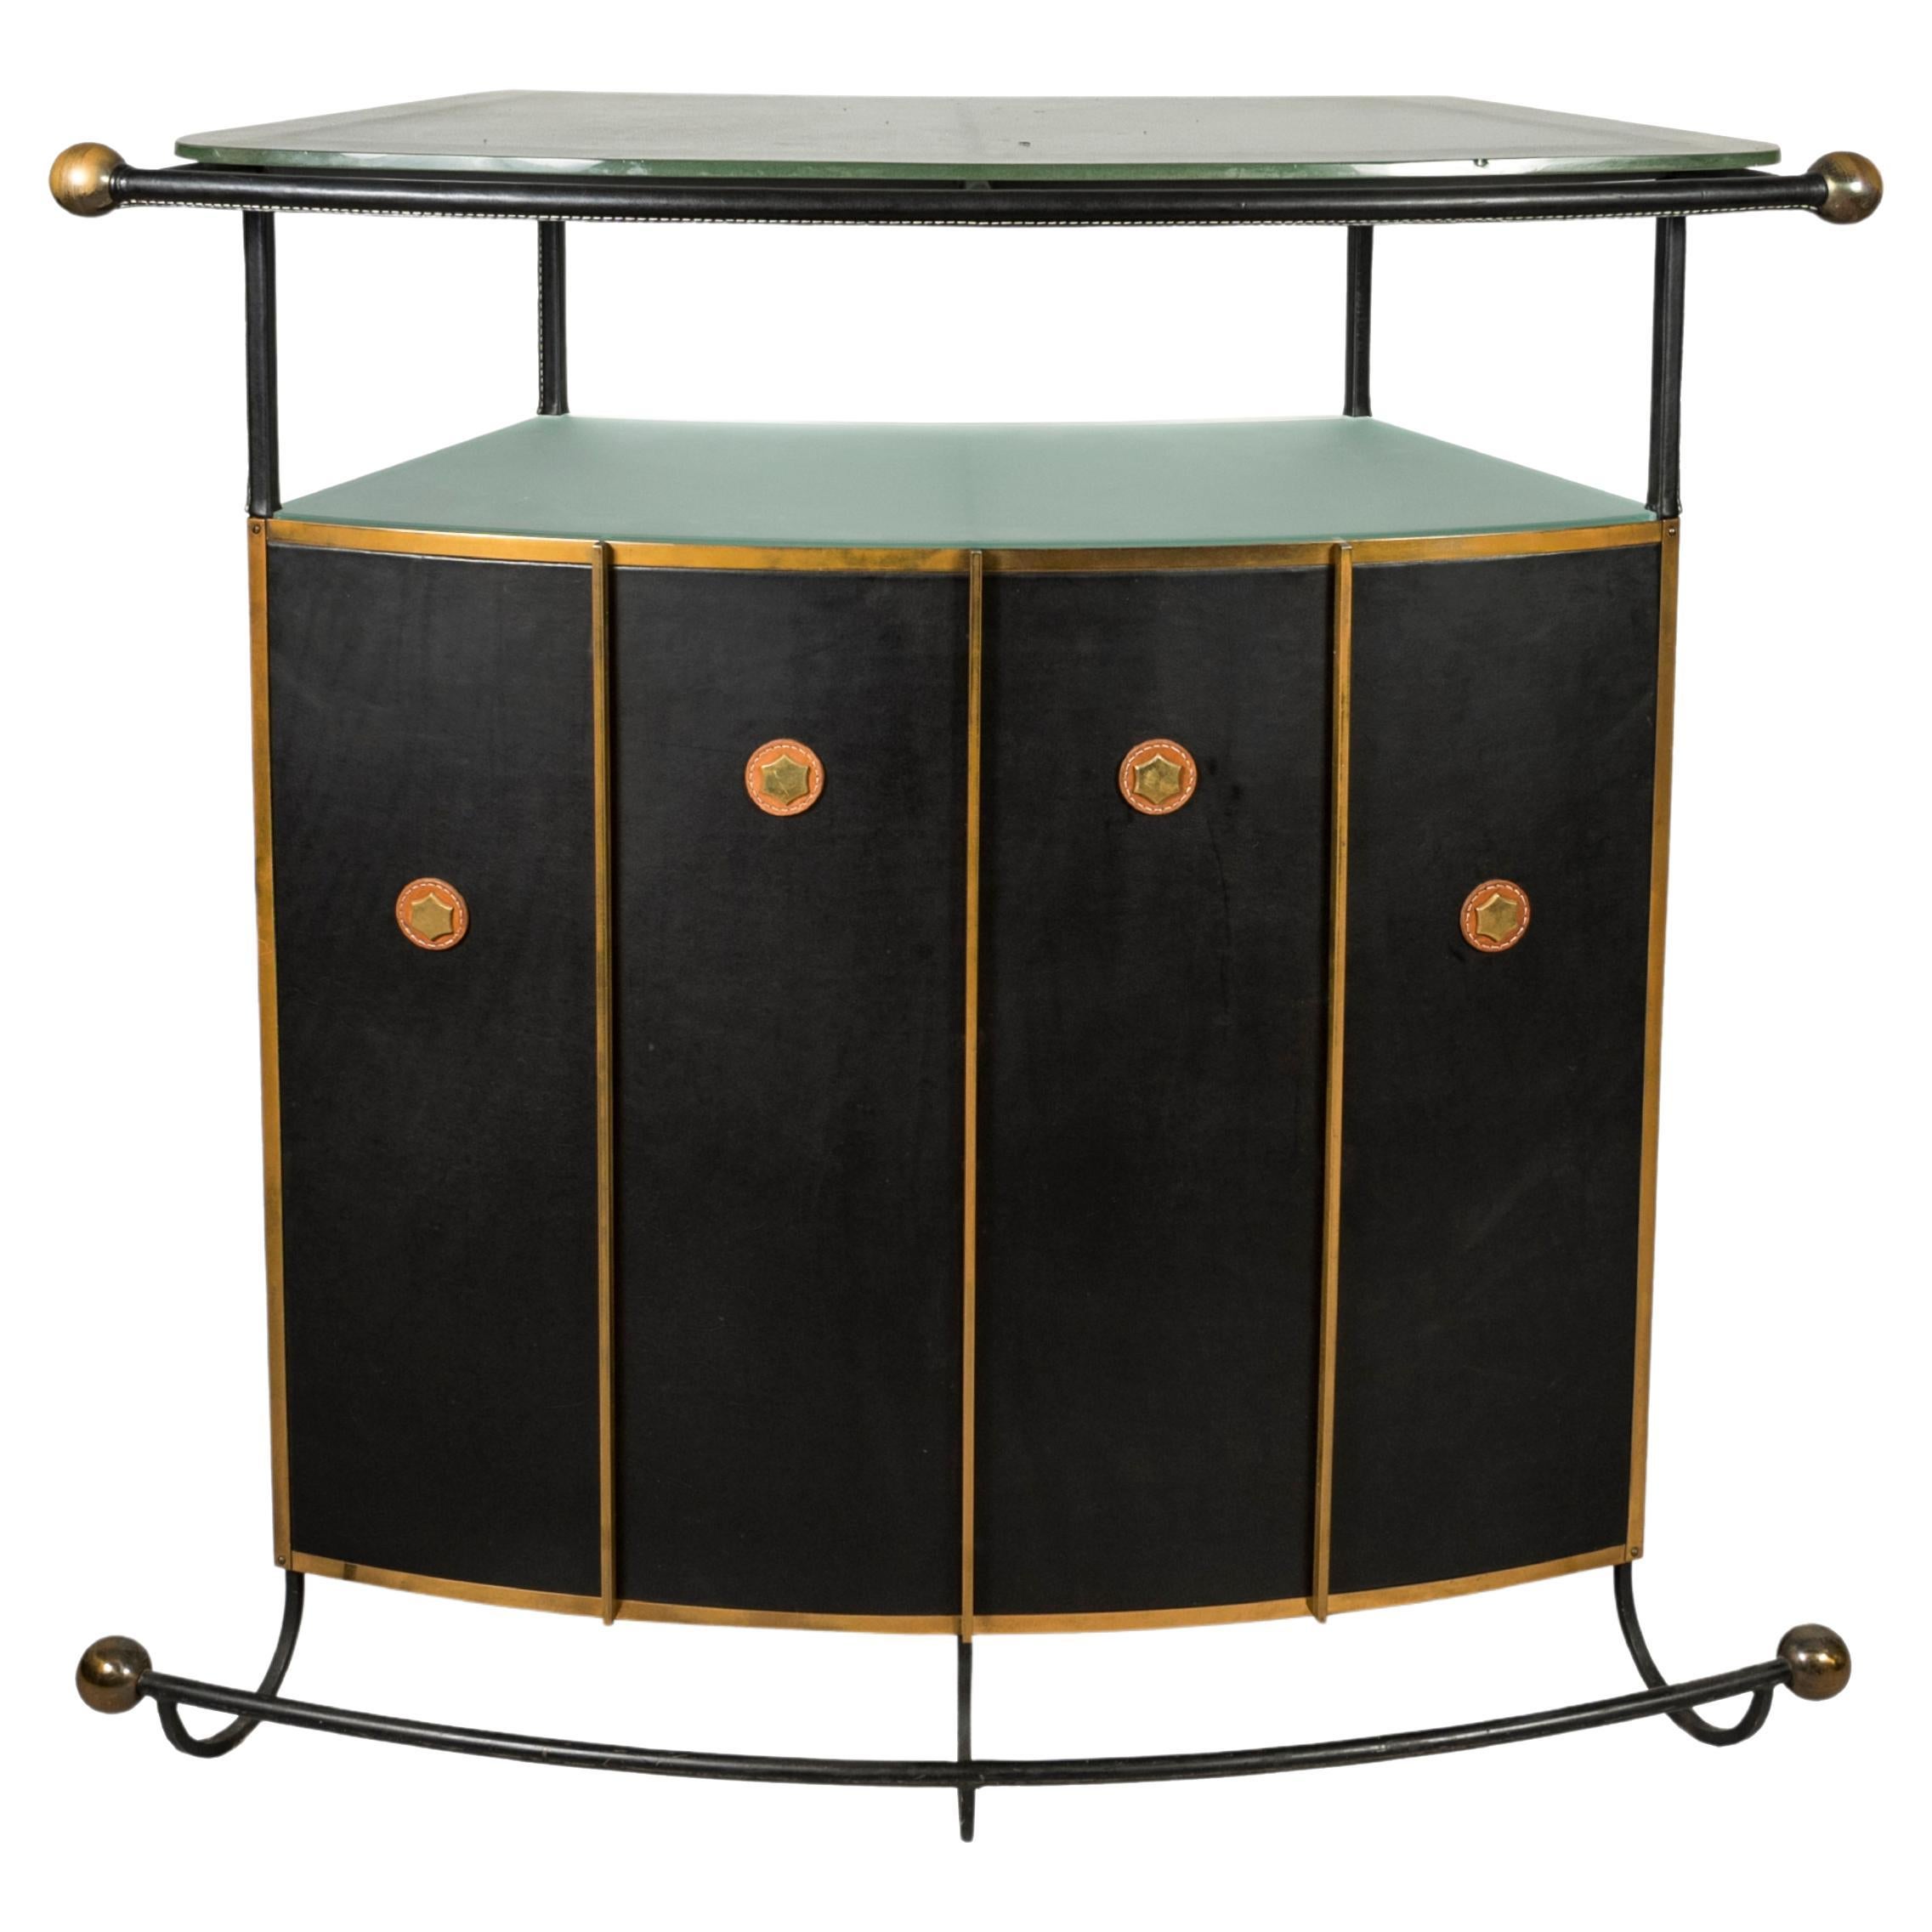 1950's Stitched Leather Dry Bar by Jacques Adnet